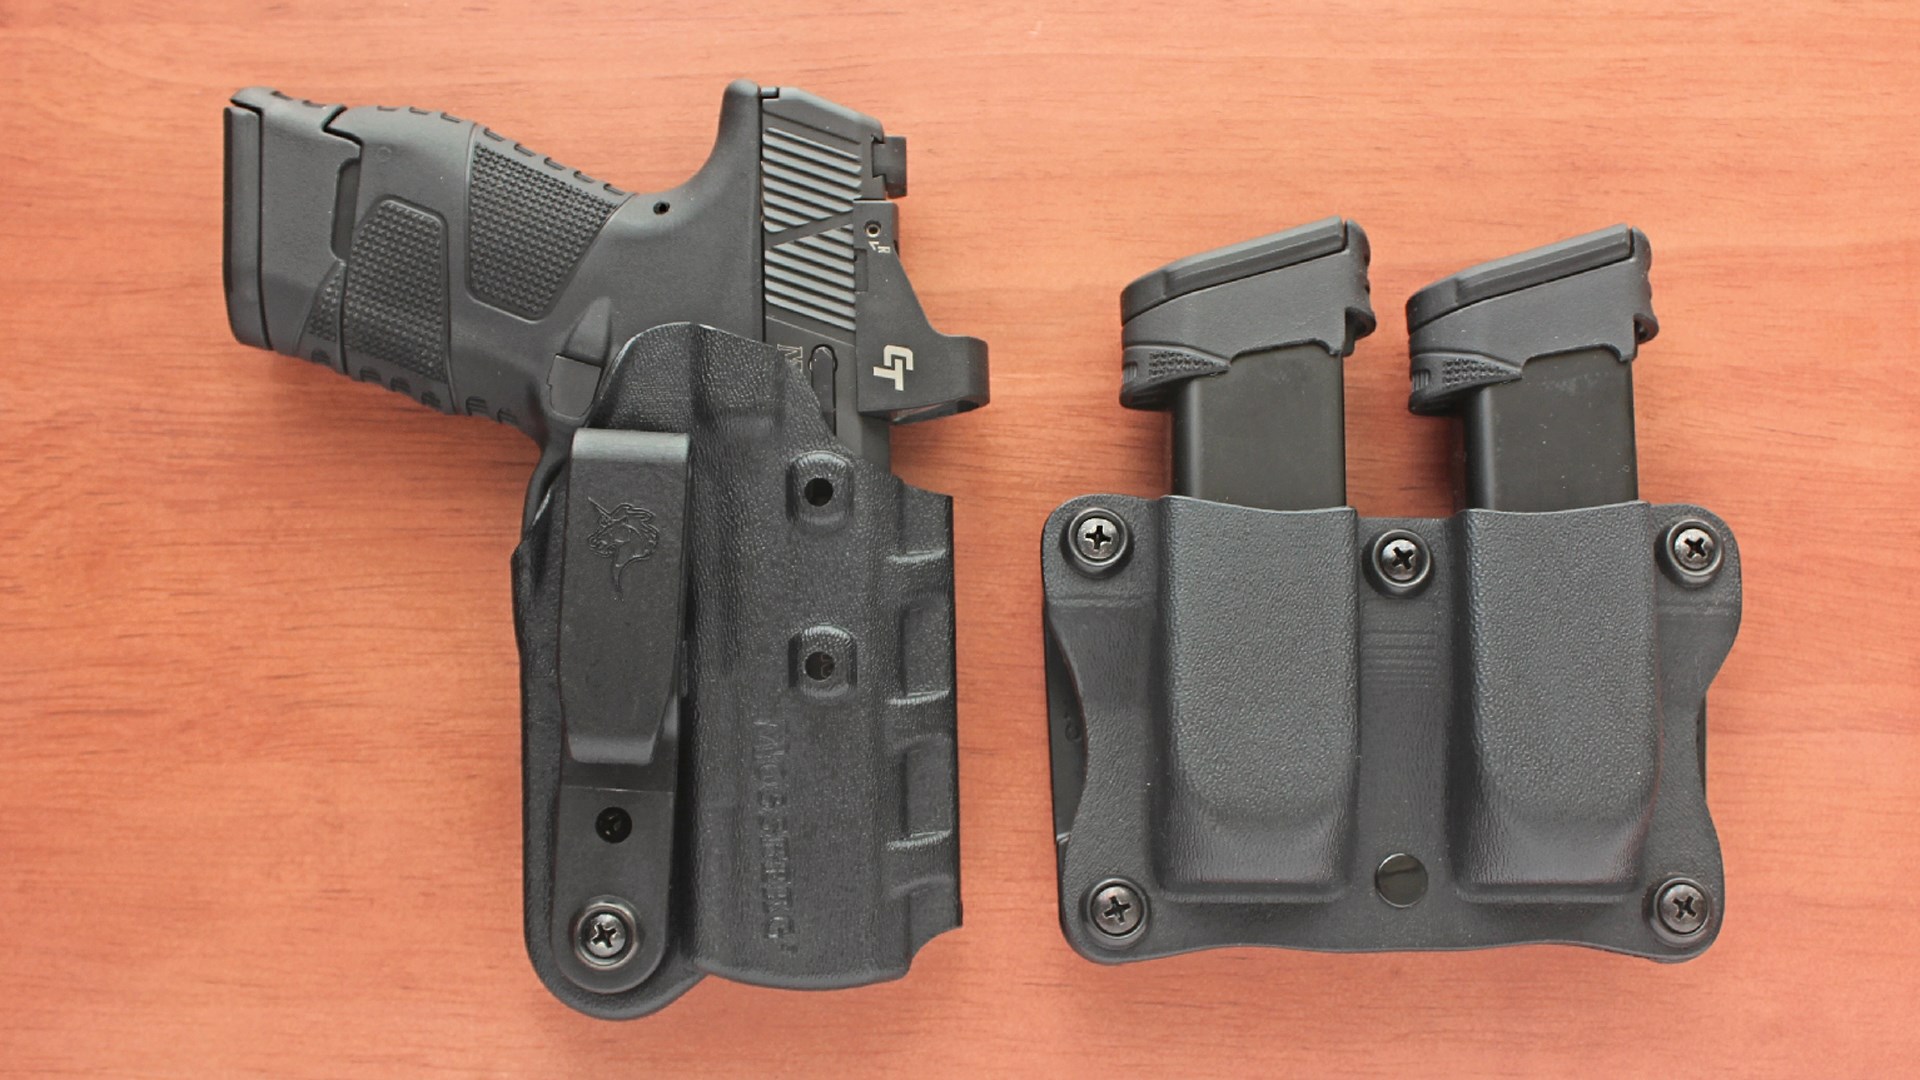 DeSantis Holster for black handgun with red-dot optic and magazine pouches loaded with mags shown on wood table